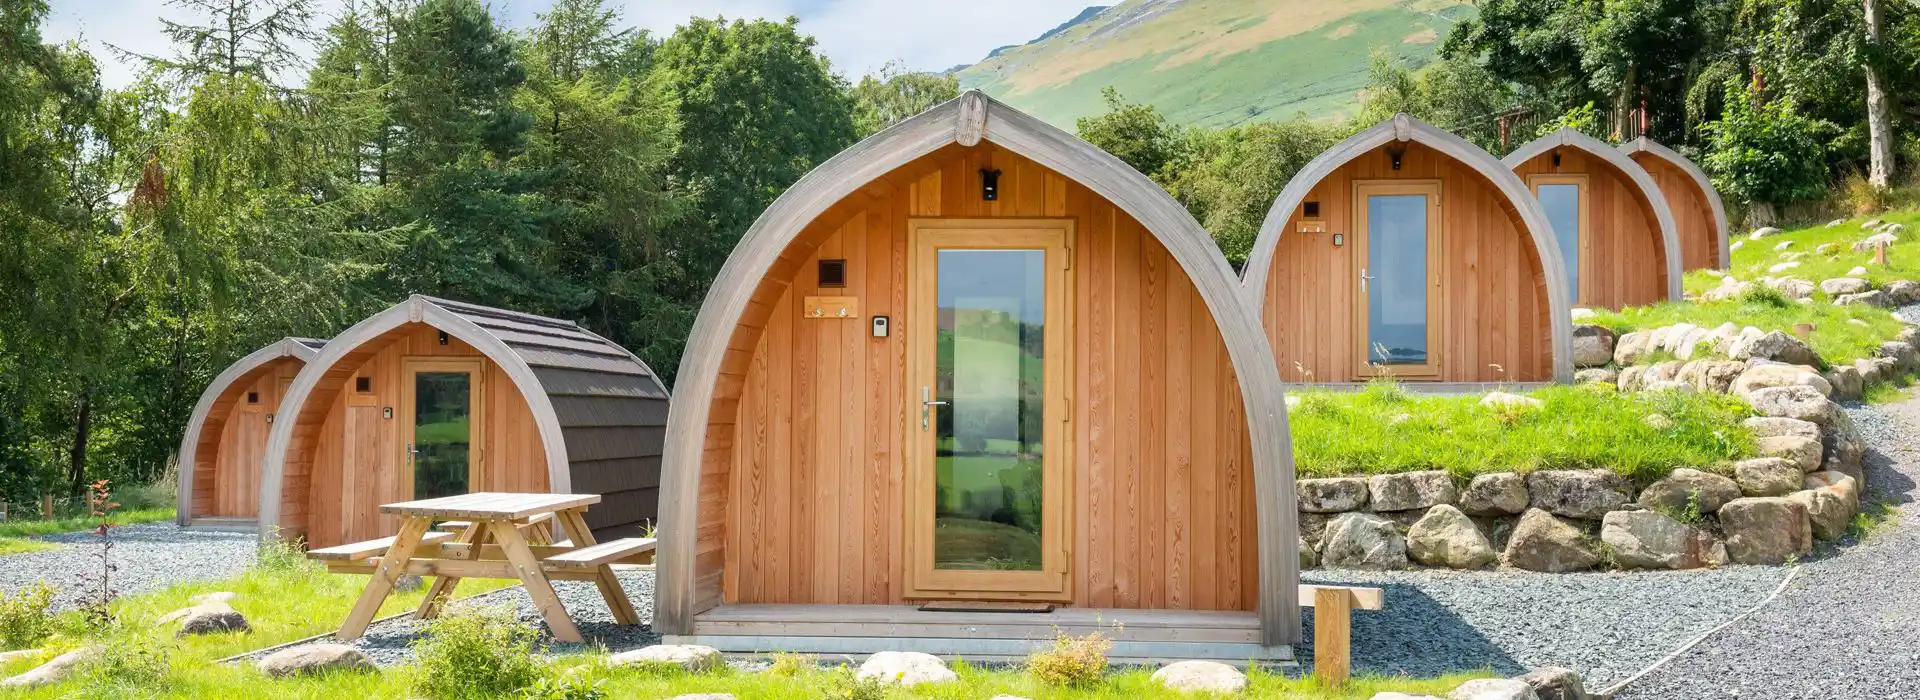 Dog friendly camping pods in the Lake District